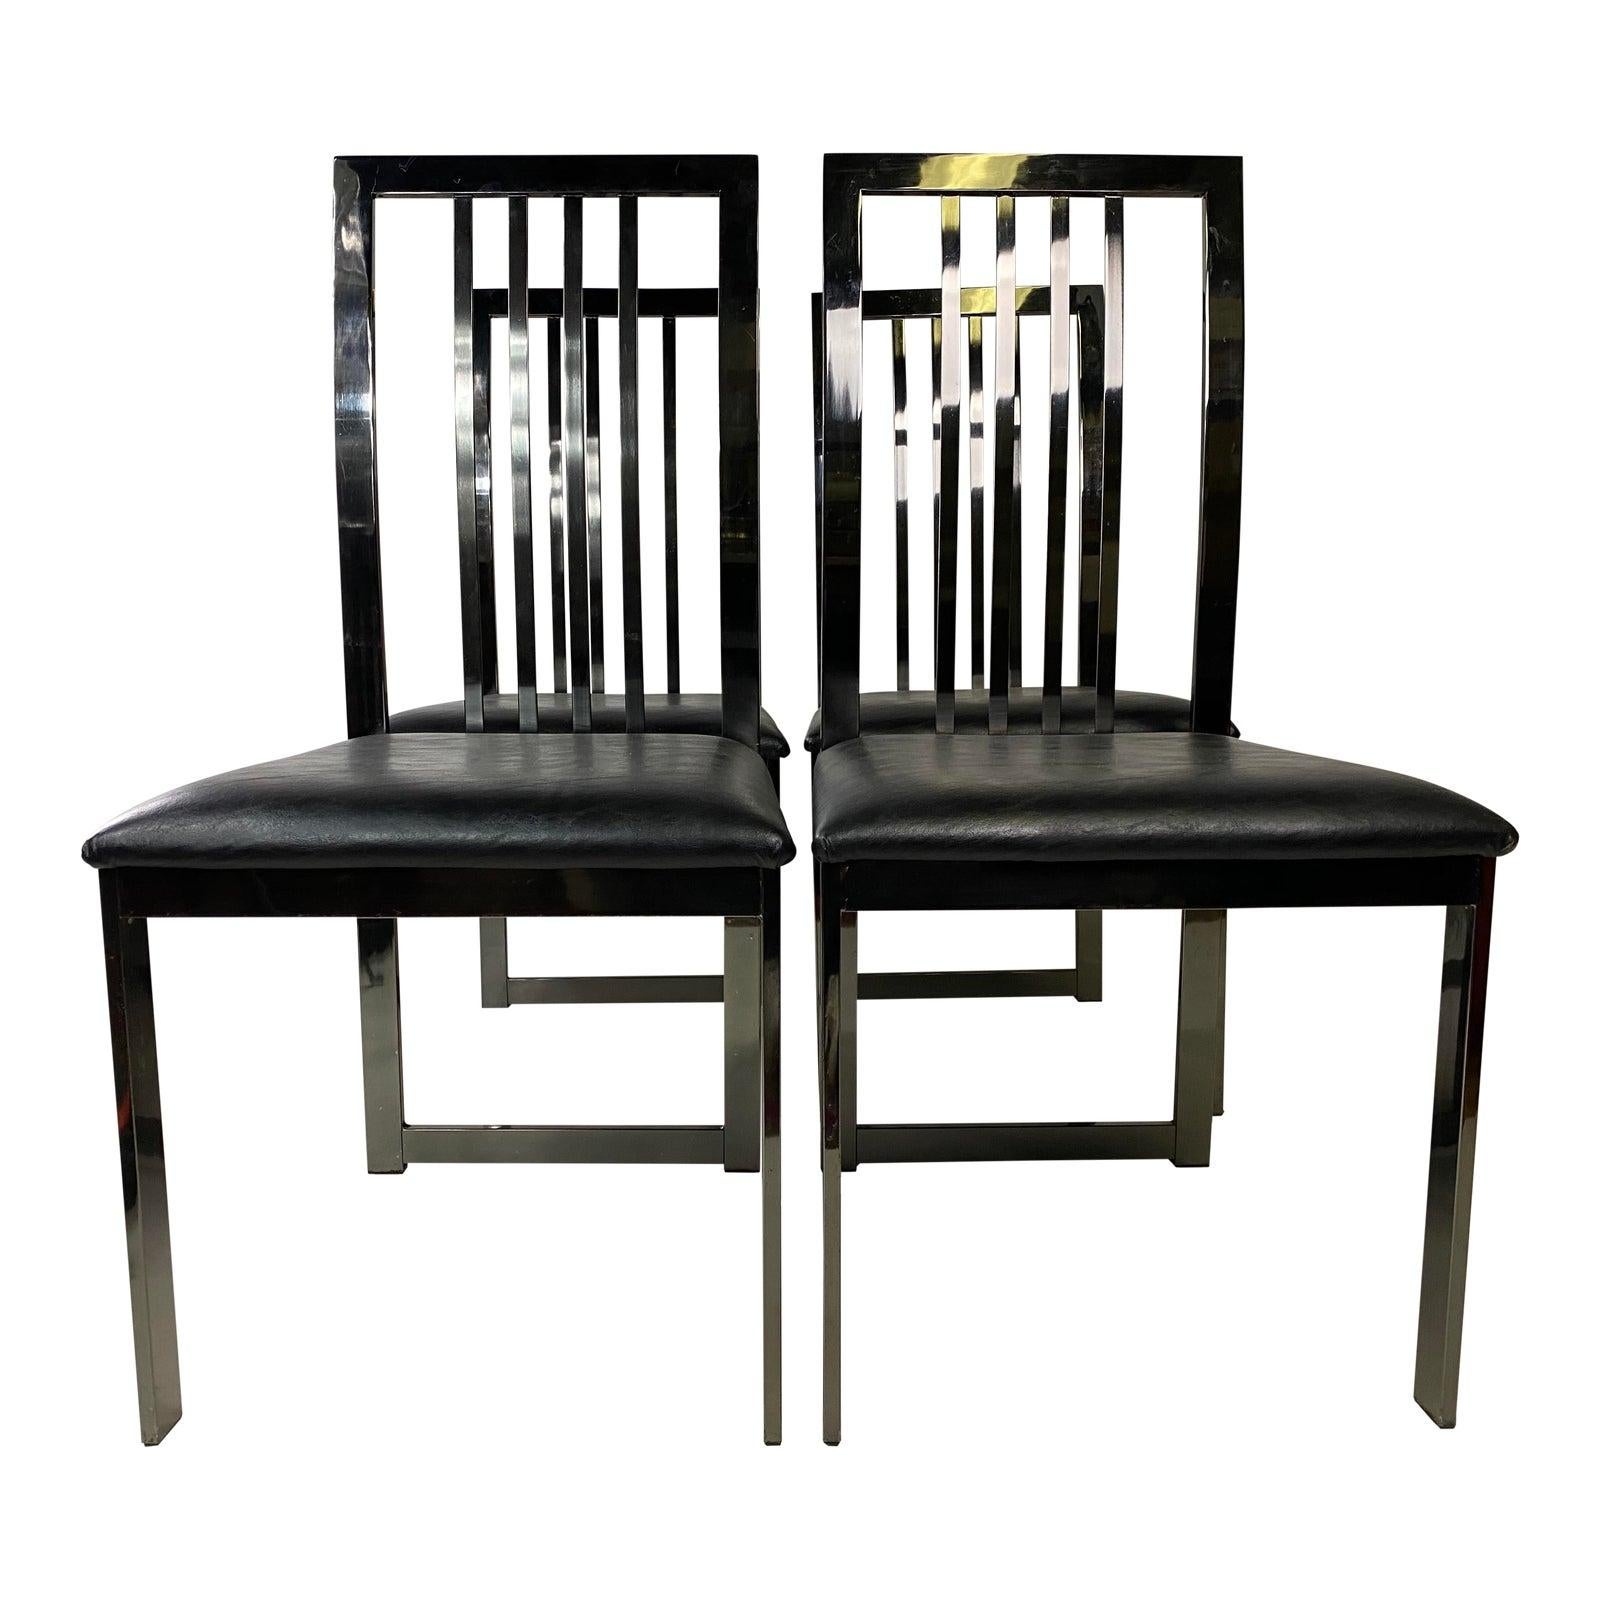 Dia Stylish Vintage Chrome High Back Dining Chairs Baughman Style, Set of 4 For Sale